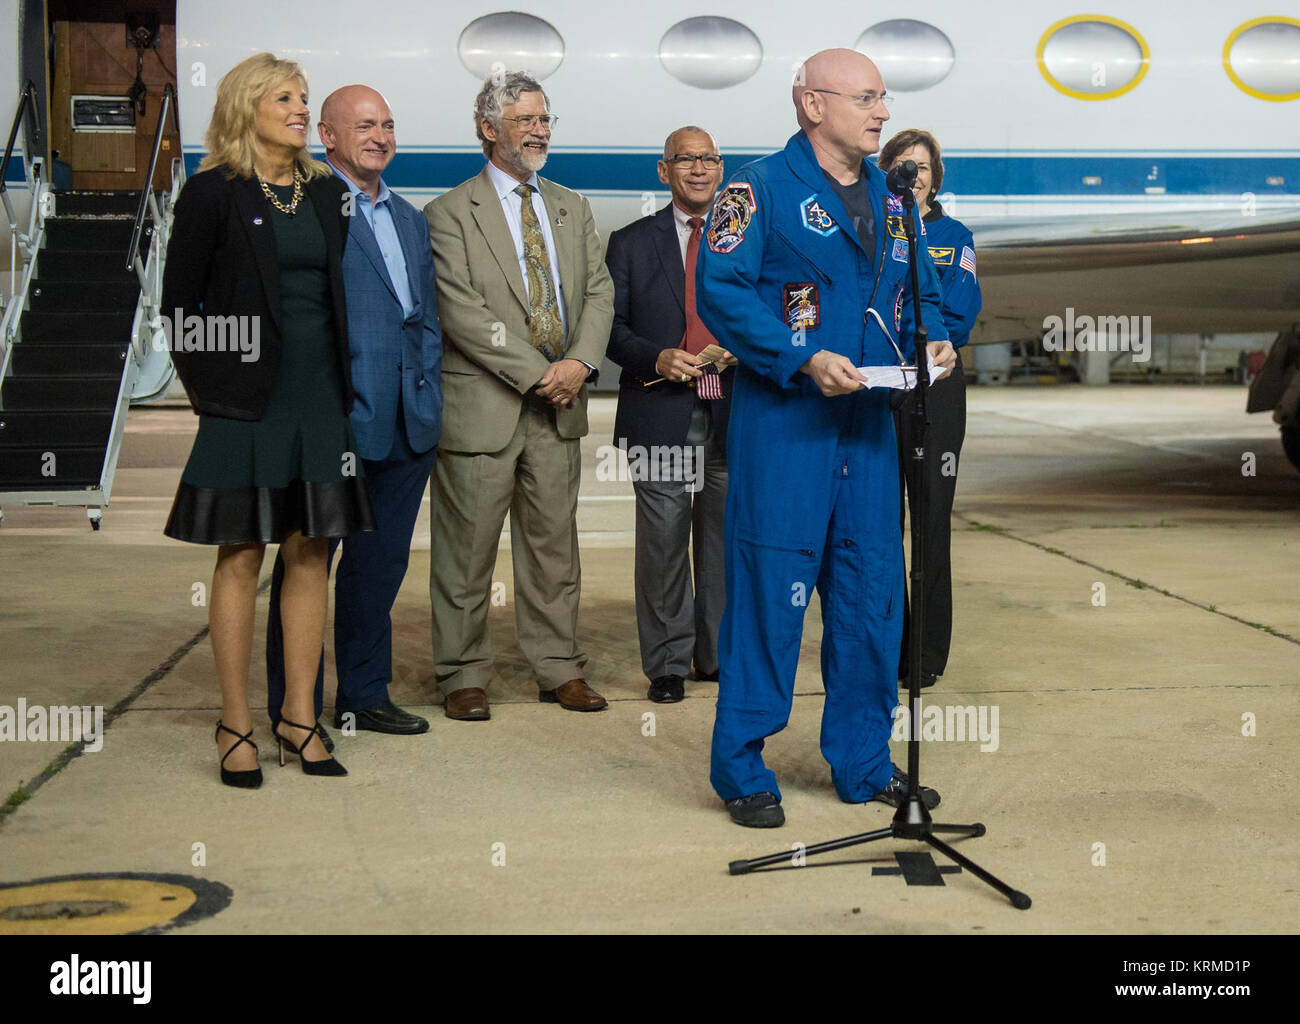 Dr. Jill Biden, wife of Vice President Joe Biden, left, Mark Kelly, former NASA astronaut and Scott Kelly's identical twin, second from left, Dr. John Holdren, director of the White House Office of Science and Technology, third from left, NASA Administrator Charles Bolden, third from right, and Ellen Ochoa, director, NASA's Johnson Space Center, watch as Expedition 46 Commander Scott Kelly of NASA speaks at Ellington Field, Thursday, March 3, 2016 in Houston, Texas after his return to Earth. Kelly and Flight Engineers Mikhail Kornienko and Sergey Volkov of Roscosmos landed in their Soyuz TMA-1 Stock Photo